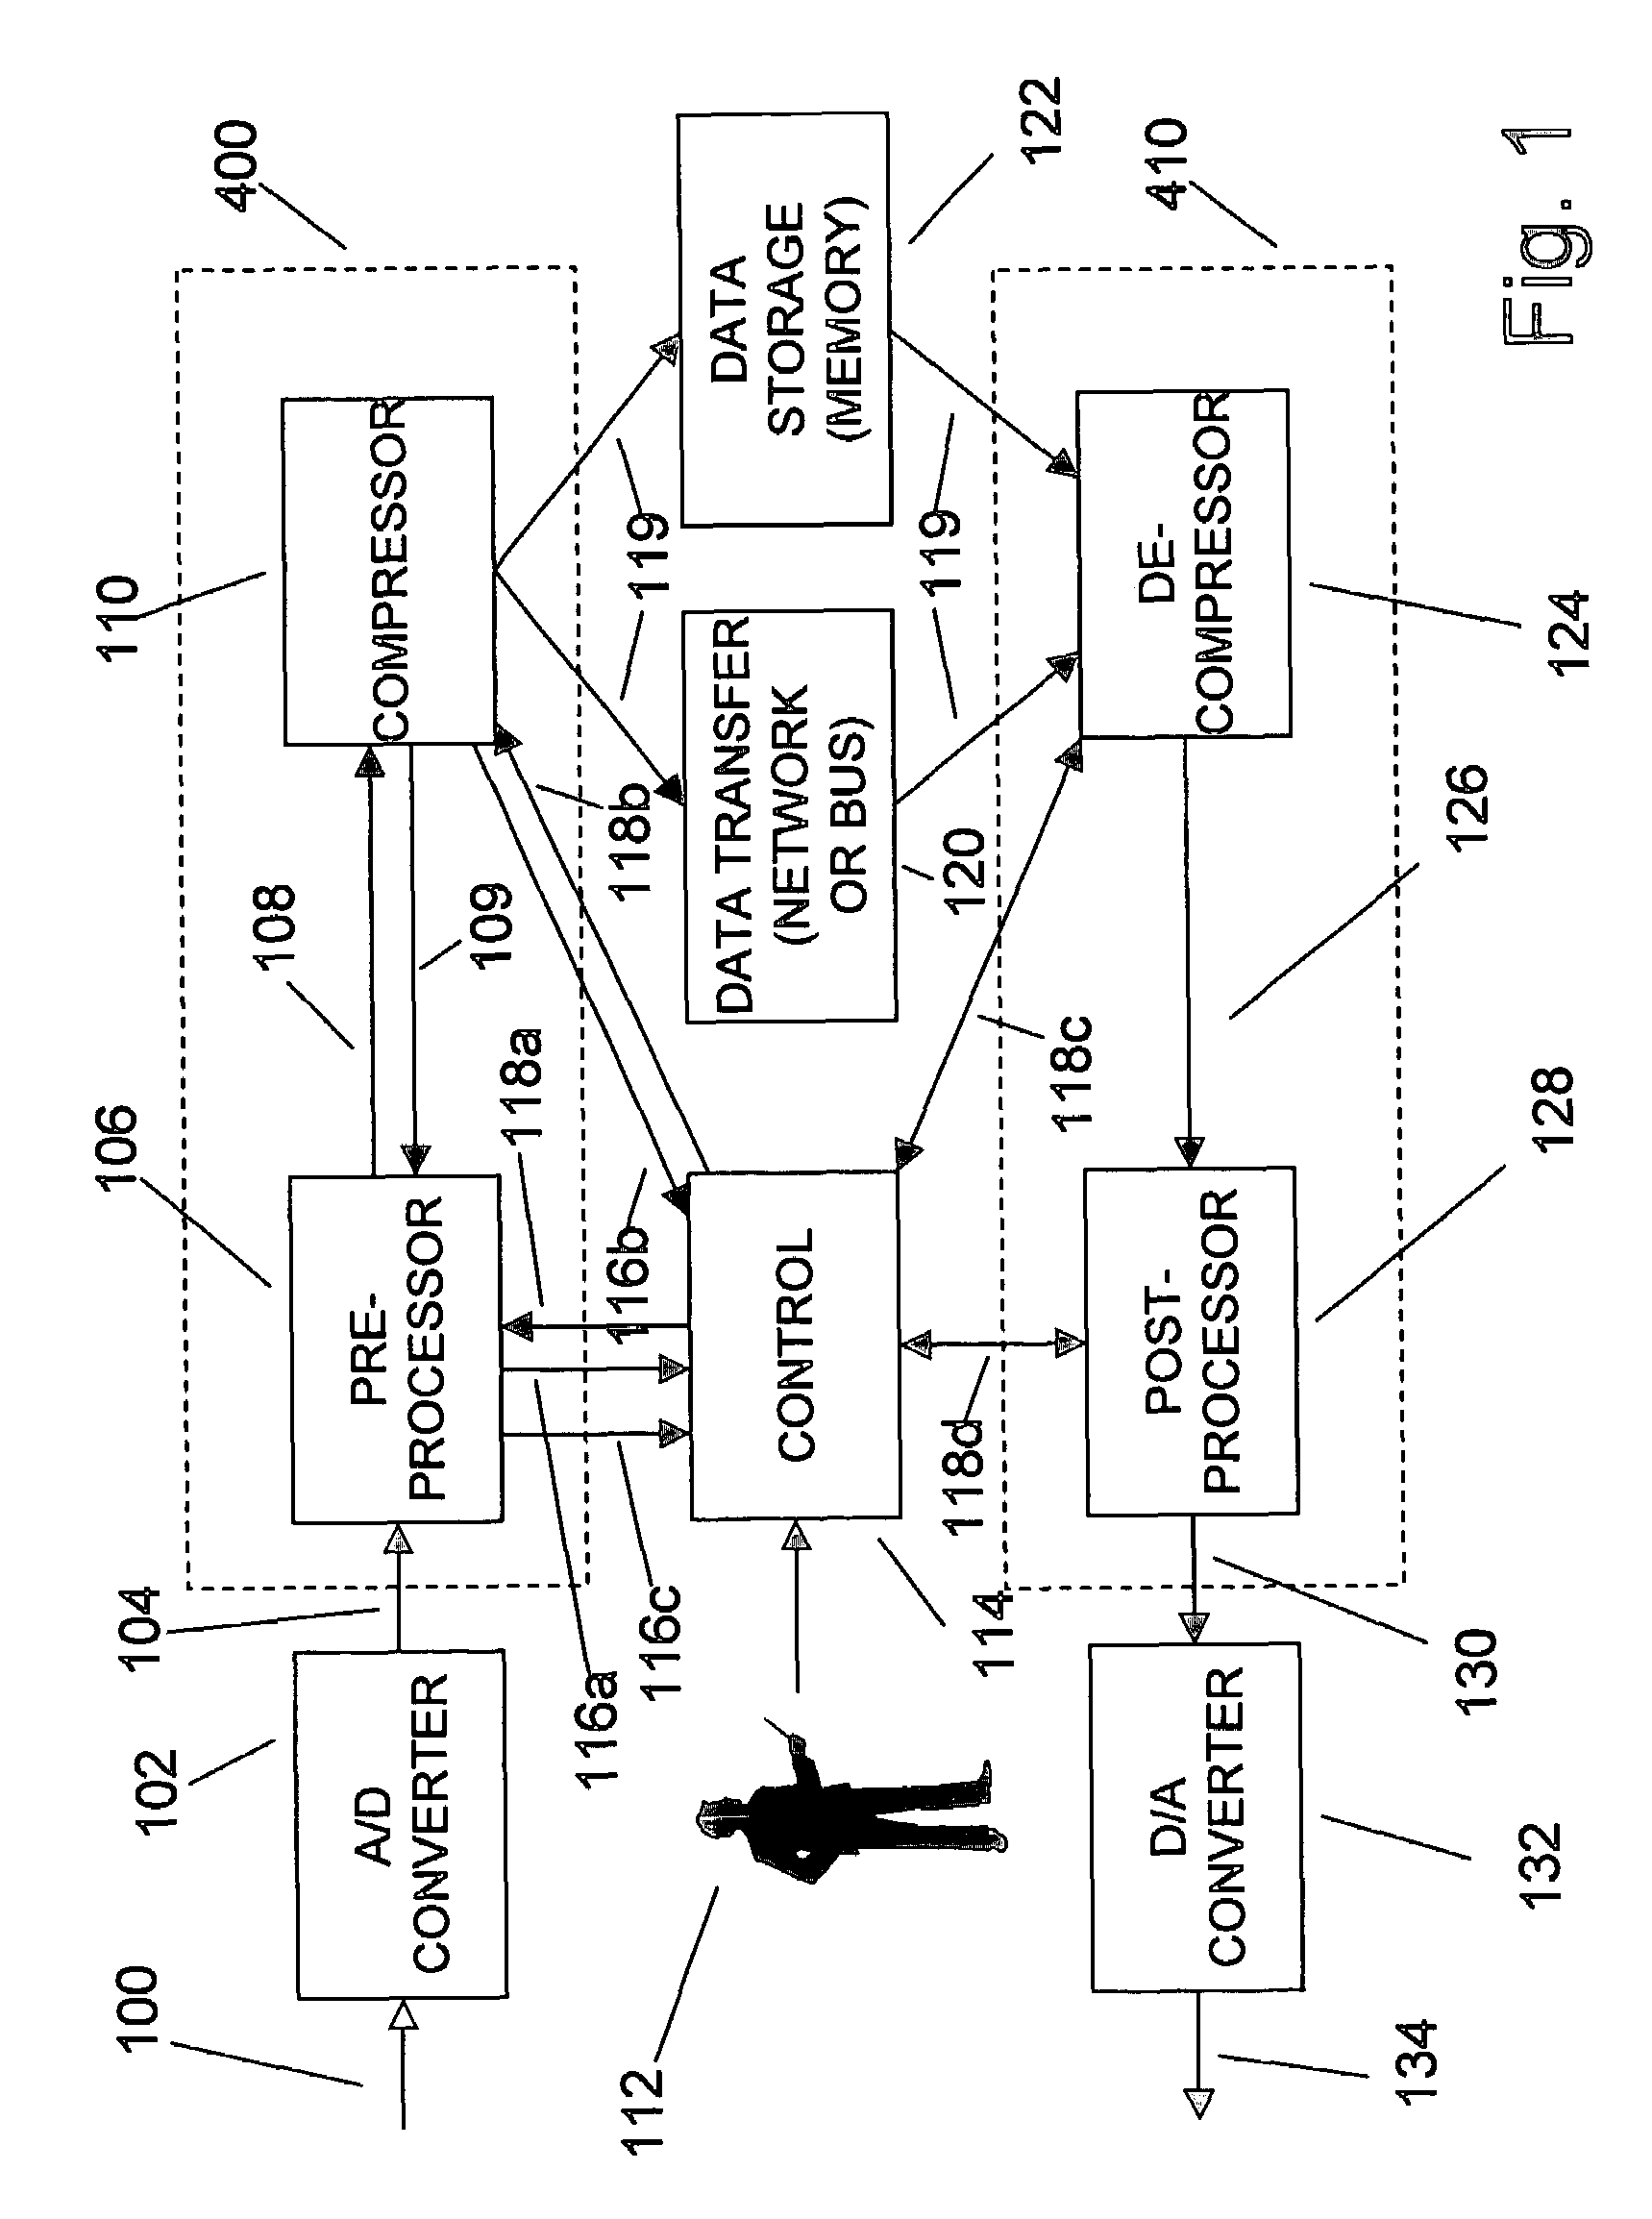 Enhanced test and measurement instruments using compression and decompression